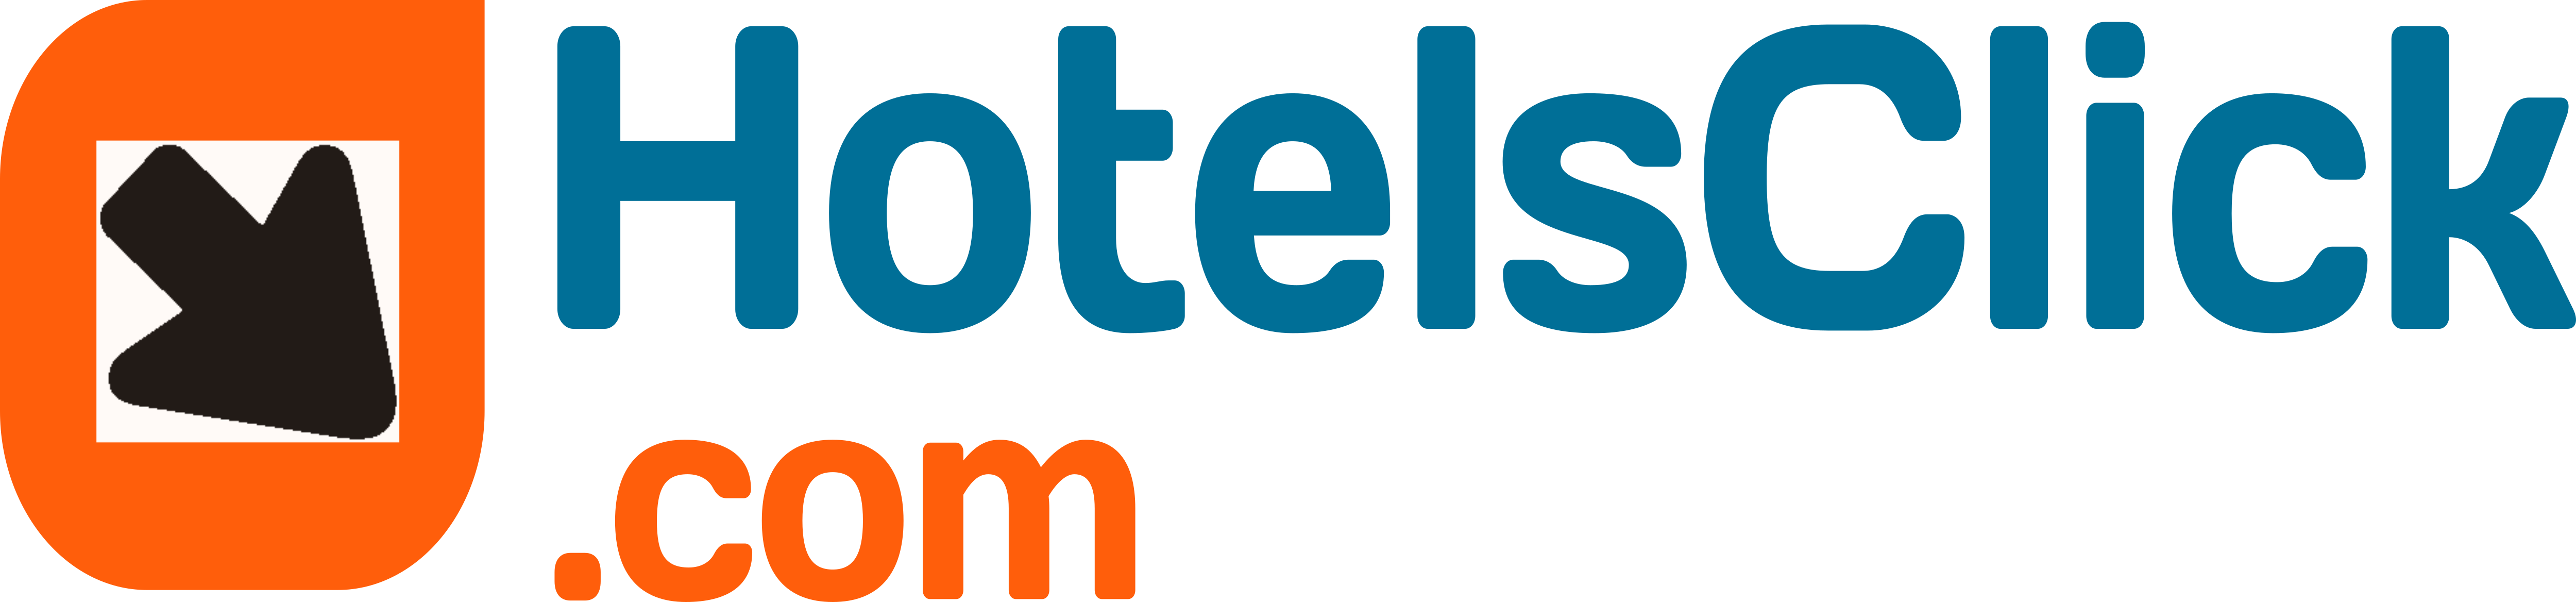 Hotelsclick Coupons